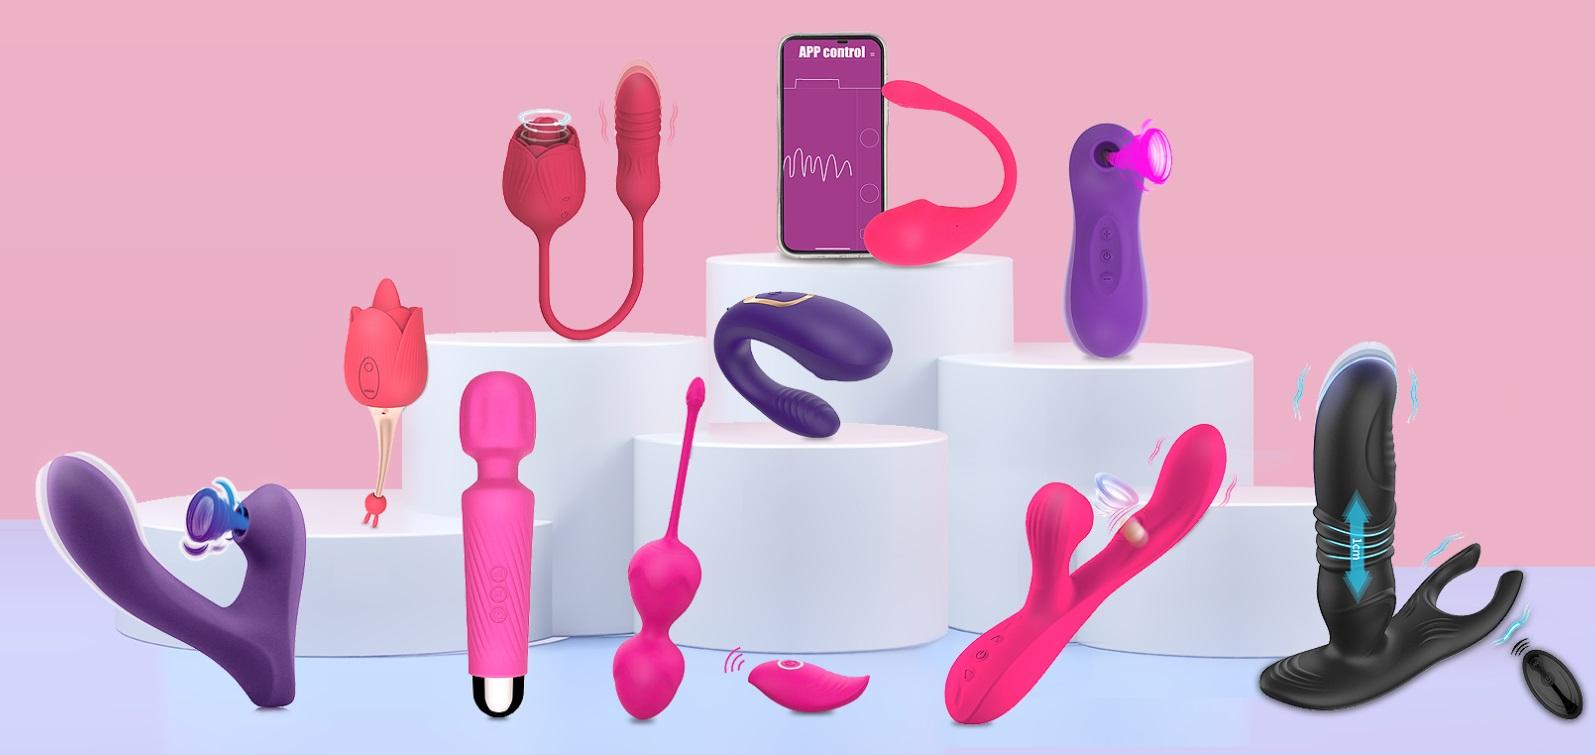 Easily customize your sex toys